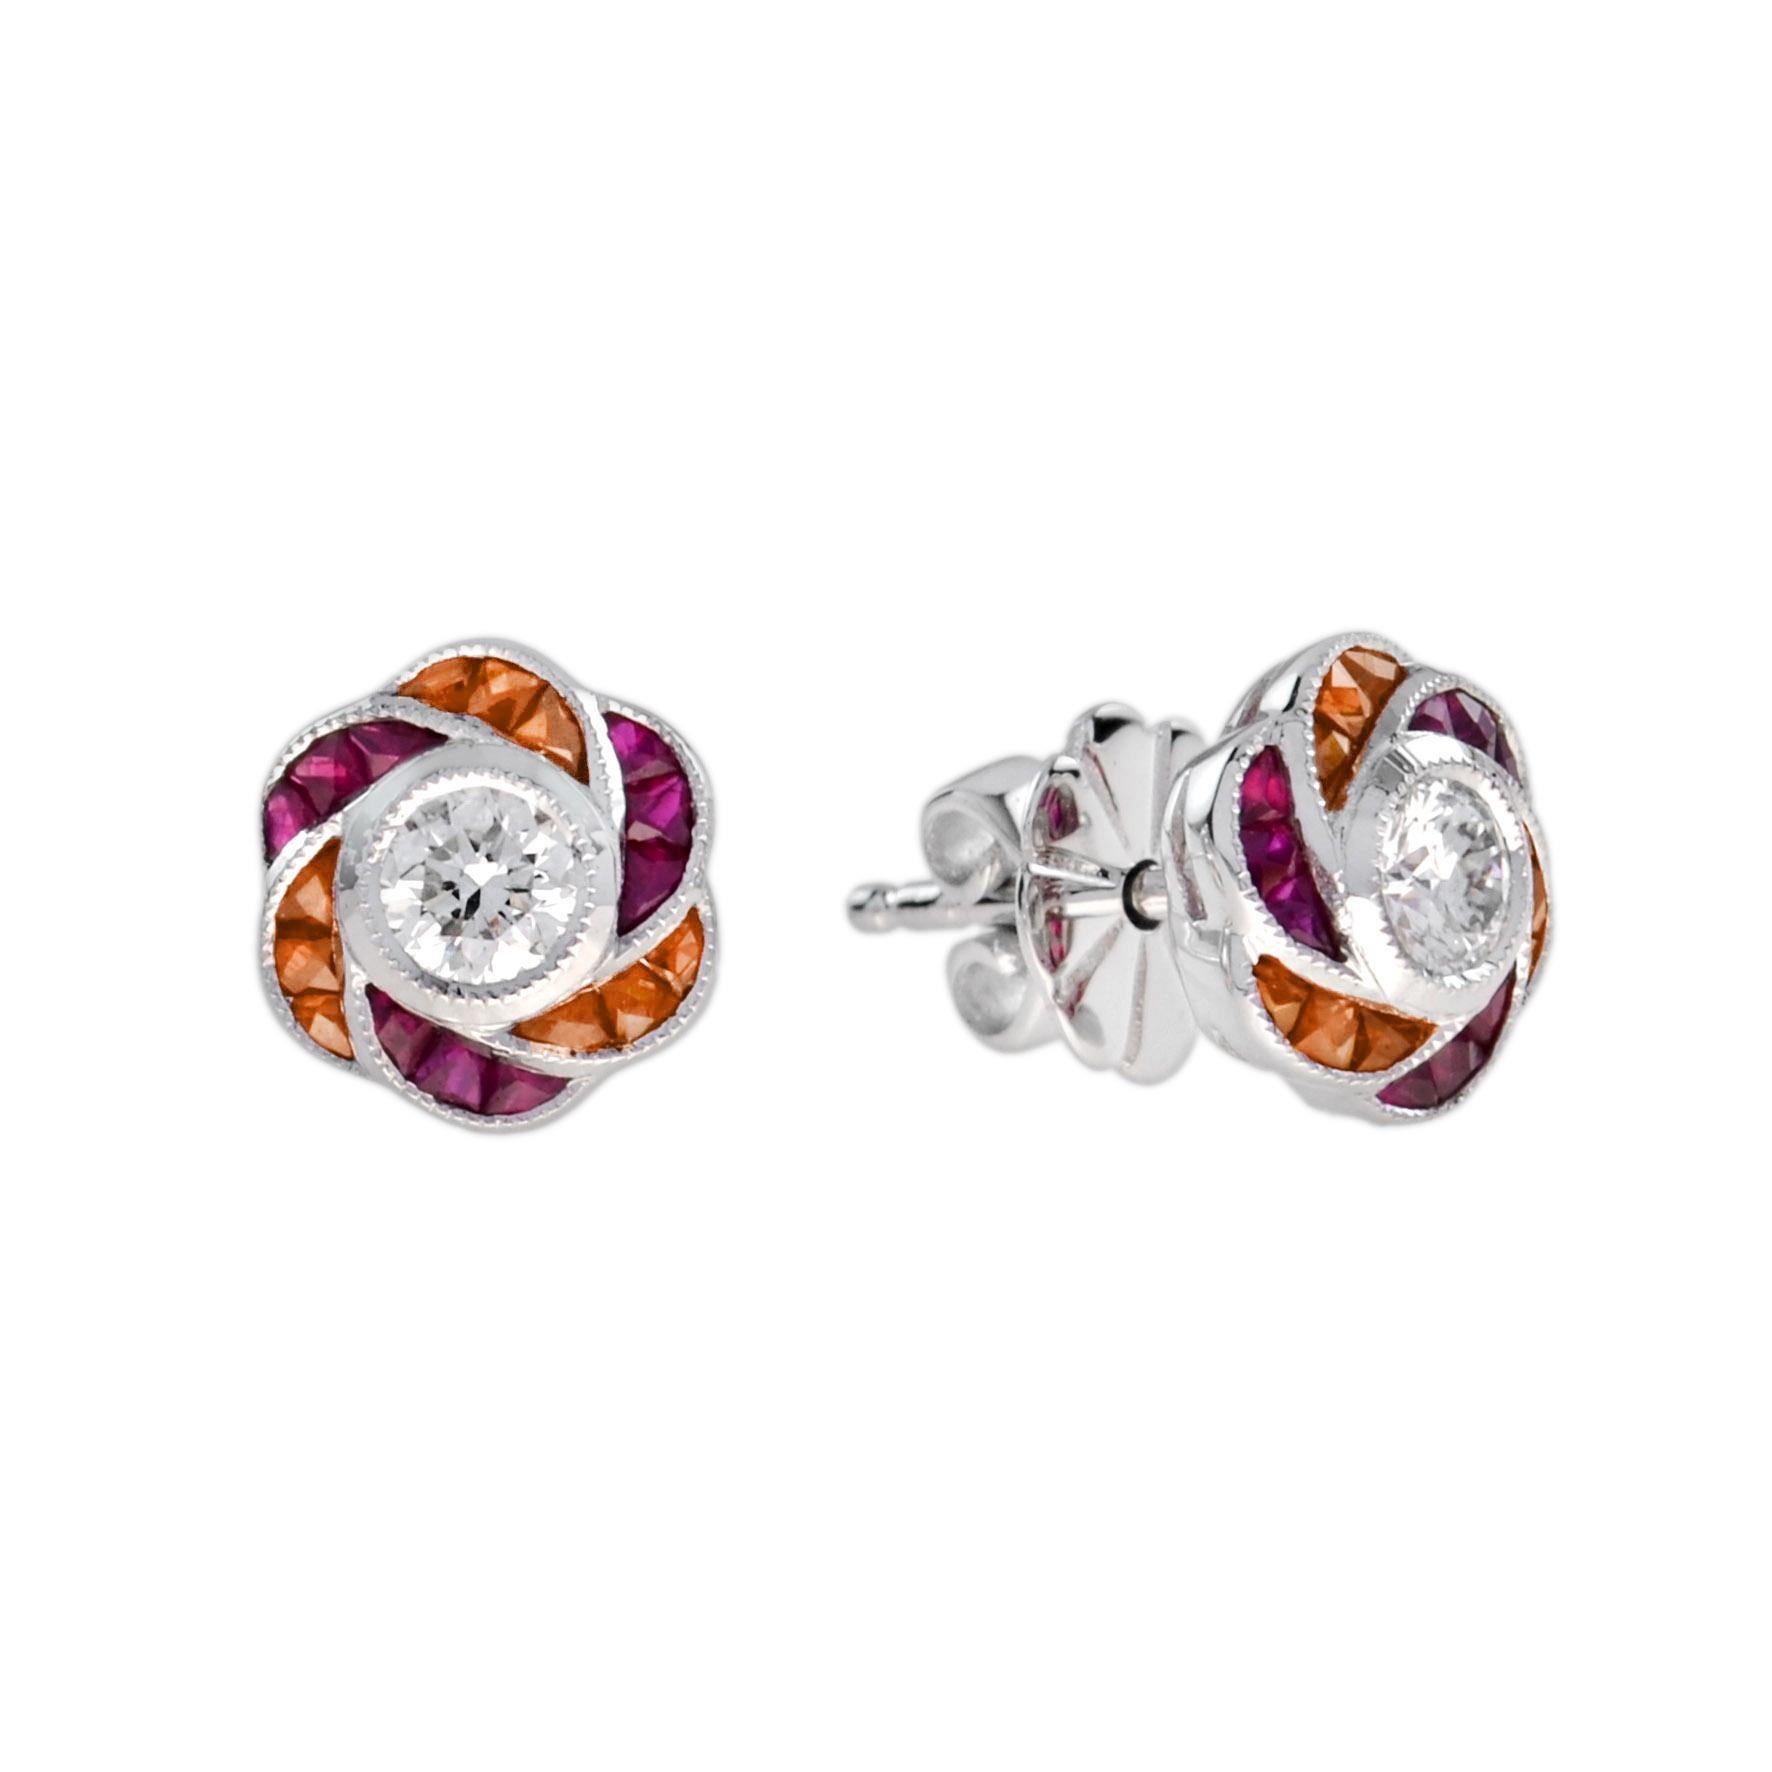 Perfect with everyday wear, these charming vintage Art Deco revivalist design earrings and  pendant feature brilliant cut diamonds surrounded by ruby and bright orange sapphire for rose petals finished look all in 18K white gold. A perfect gift